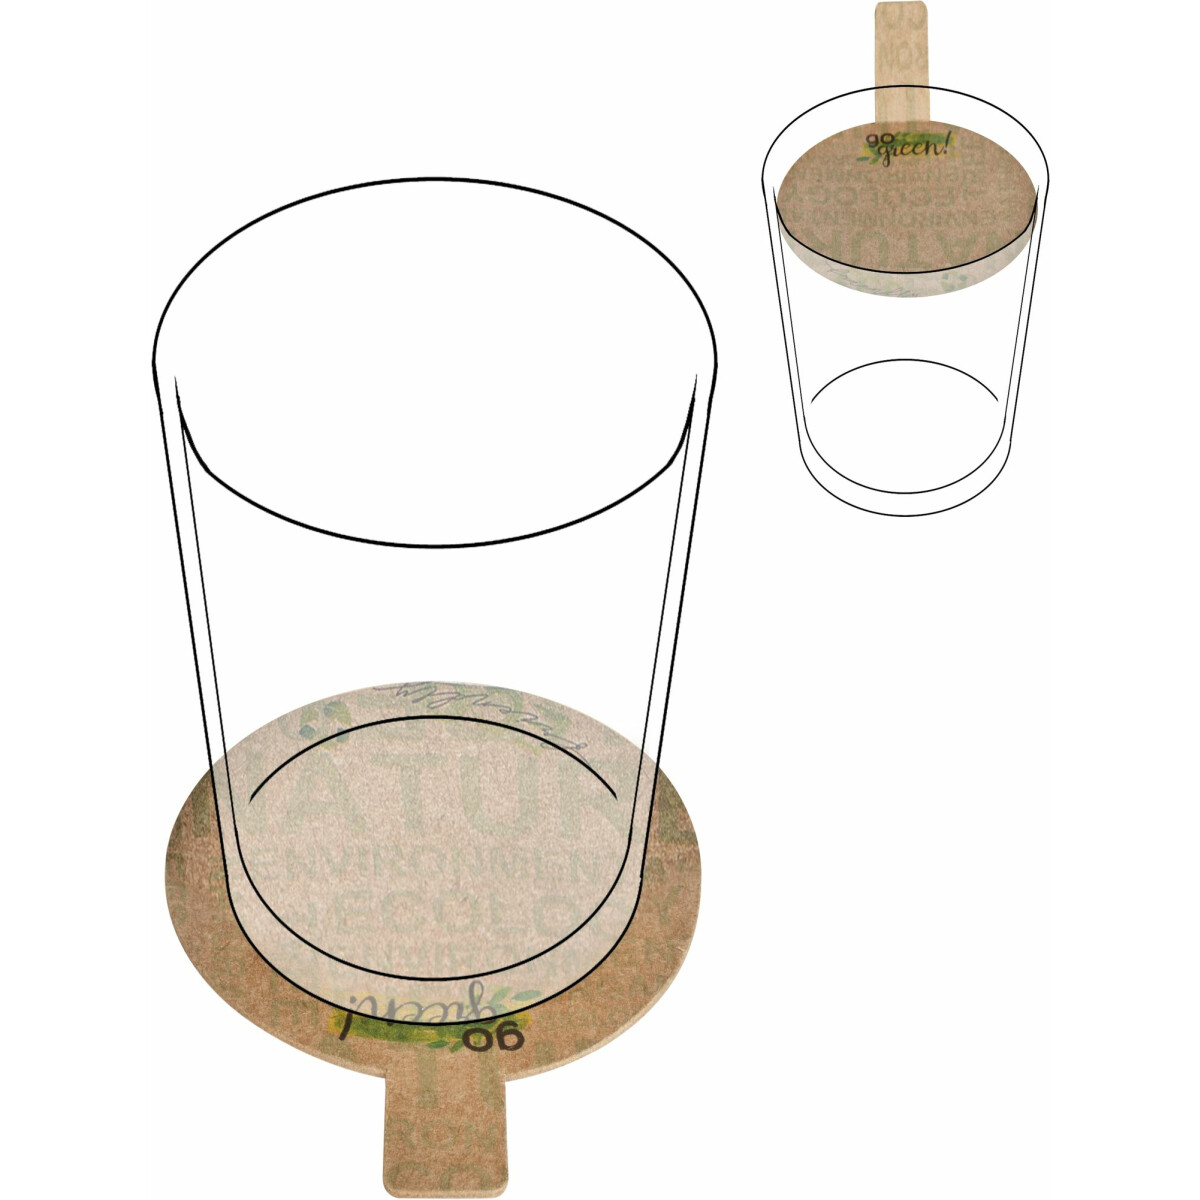 2-in-1 cup holder/lid made from strong organic cardboard....